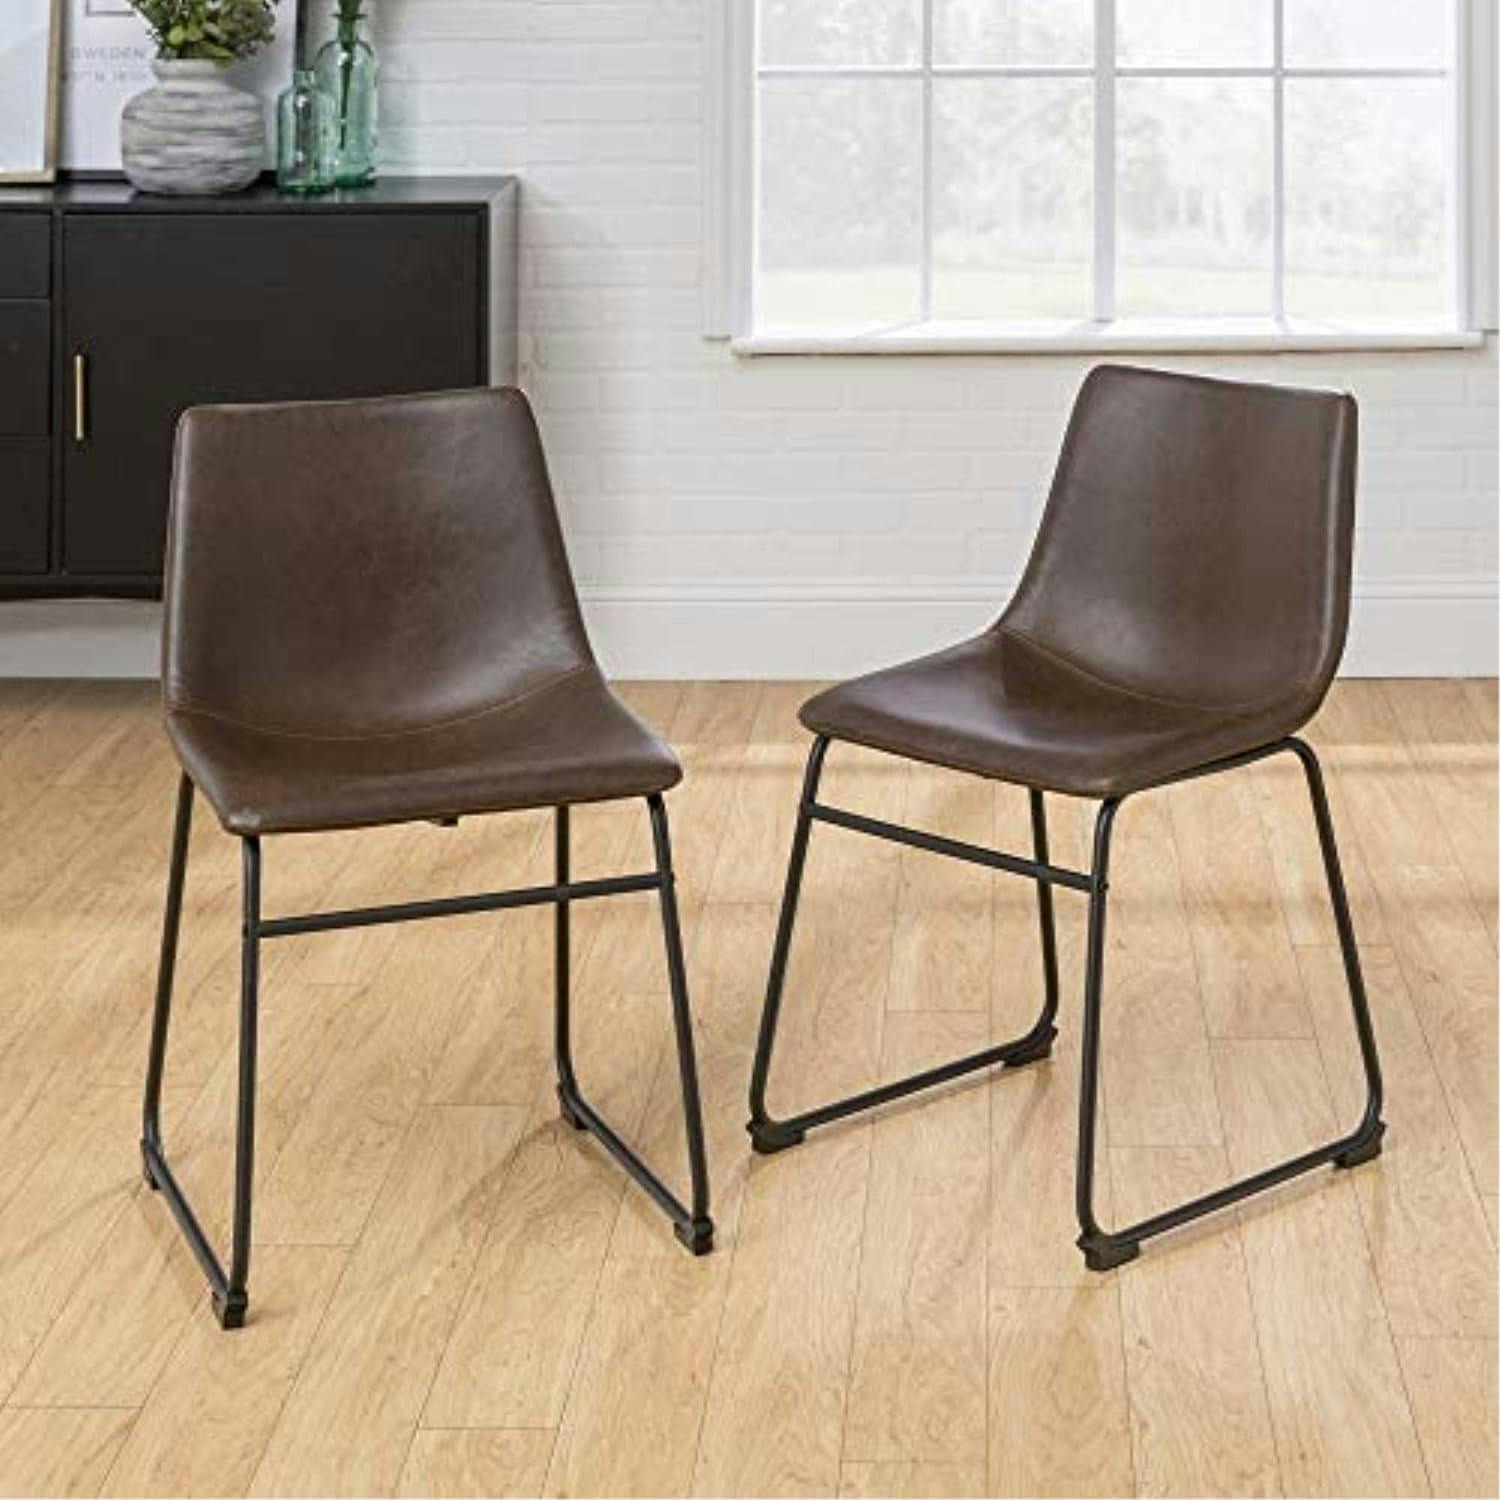 Industrial Brown Faux Leather and Metal Dining Chair Set